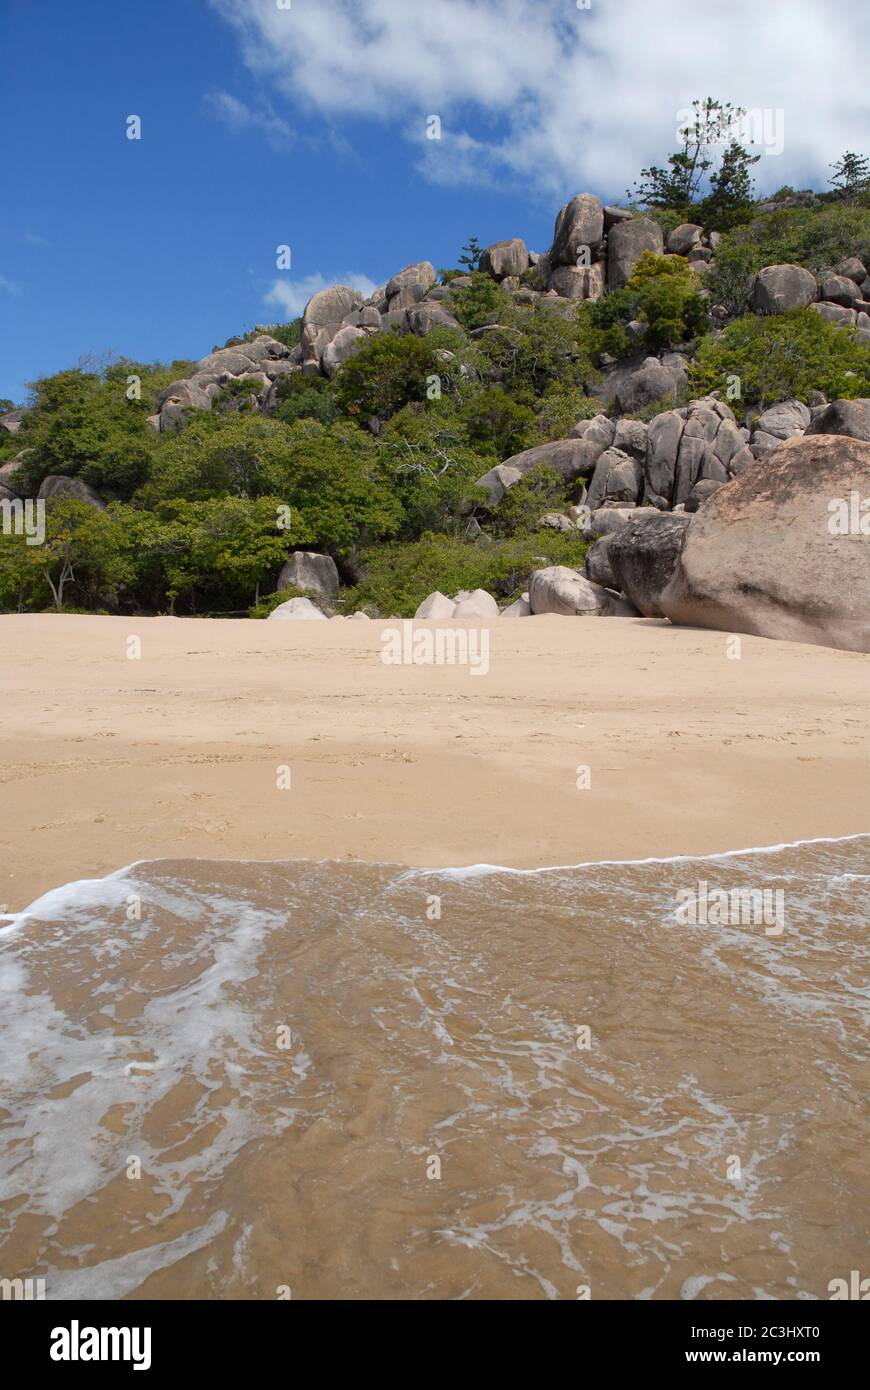 Sea to beach view with Hoop pines and granite boulders at Radical Bay, typical of Magnetic Island, Queensland, Australia Stock Photo